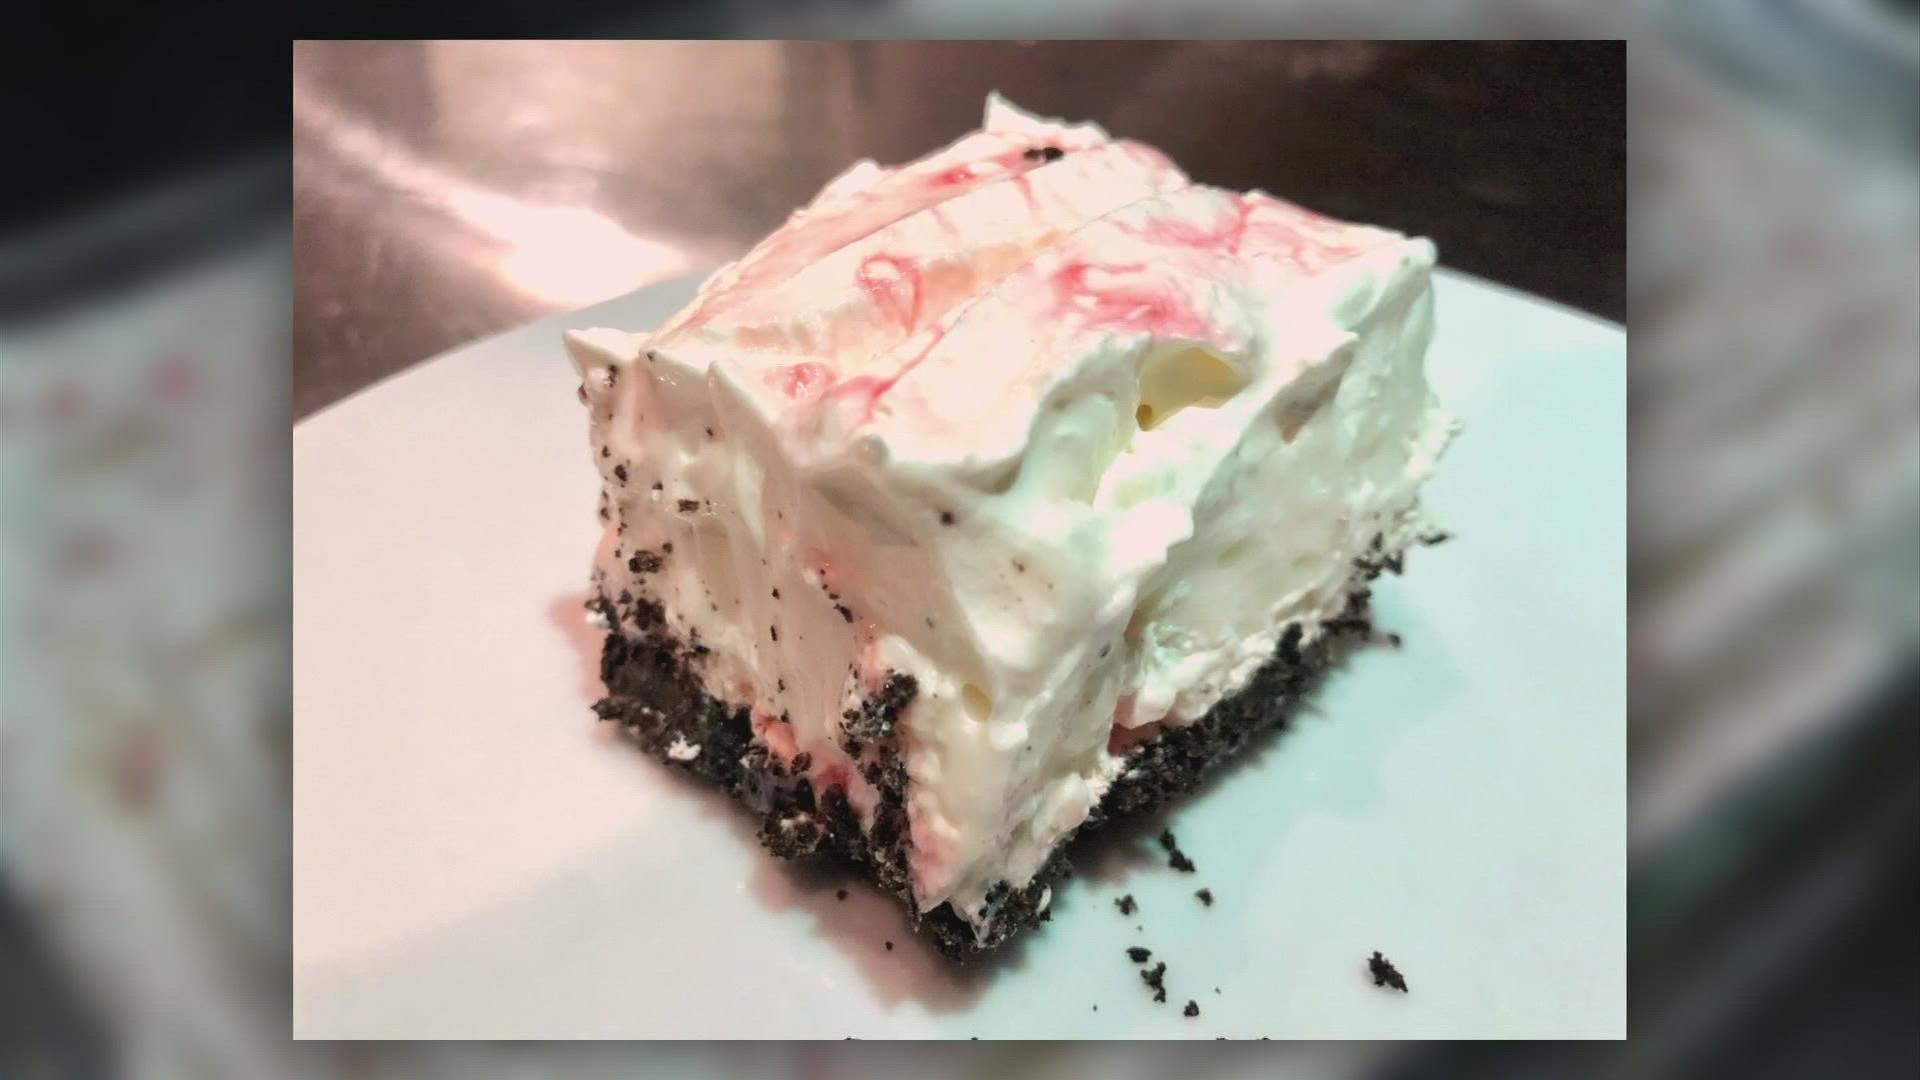 This dessert is a creative and tasty way to put those leftover candy canes to good use.